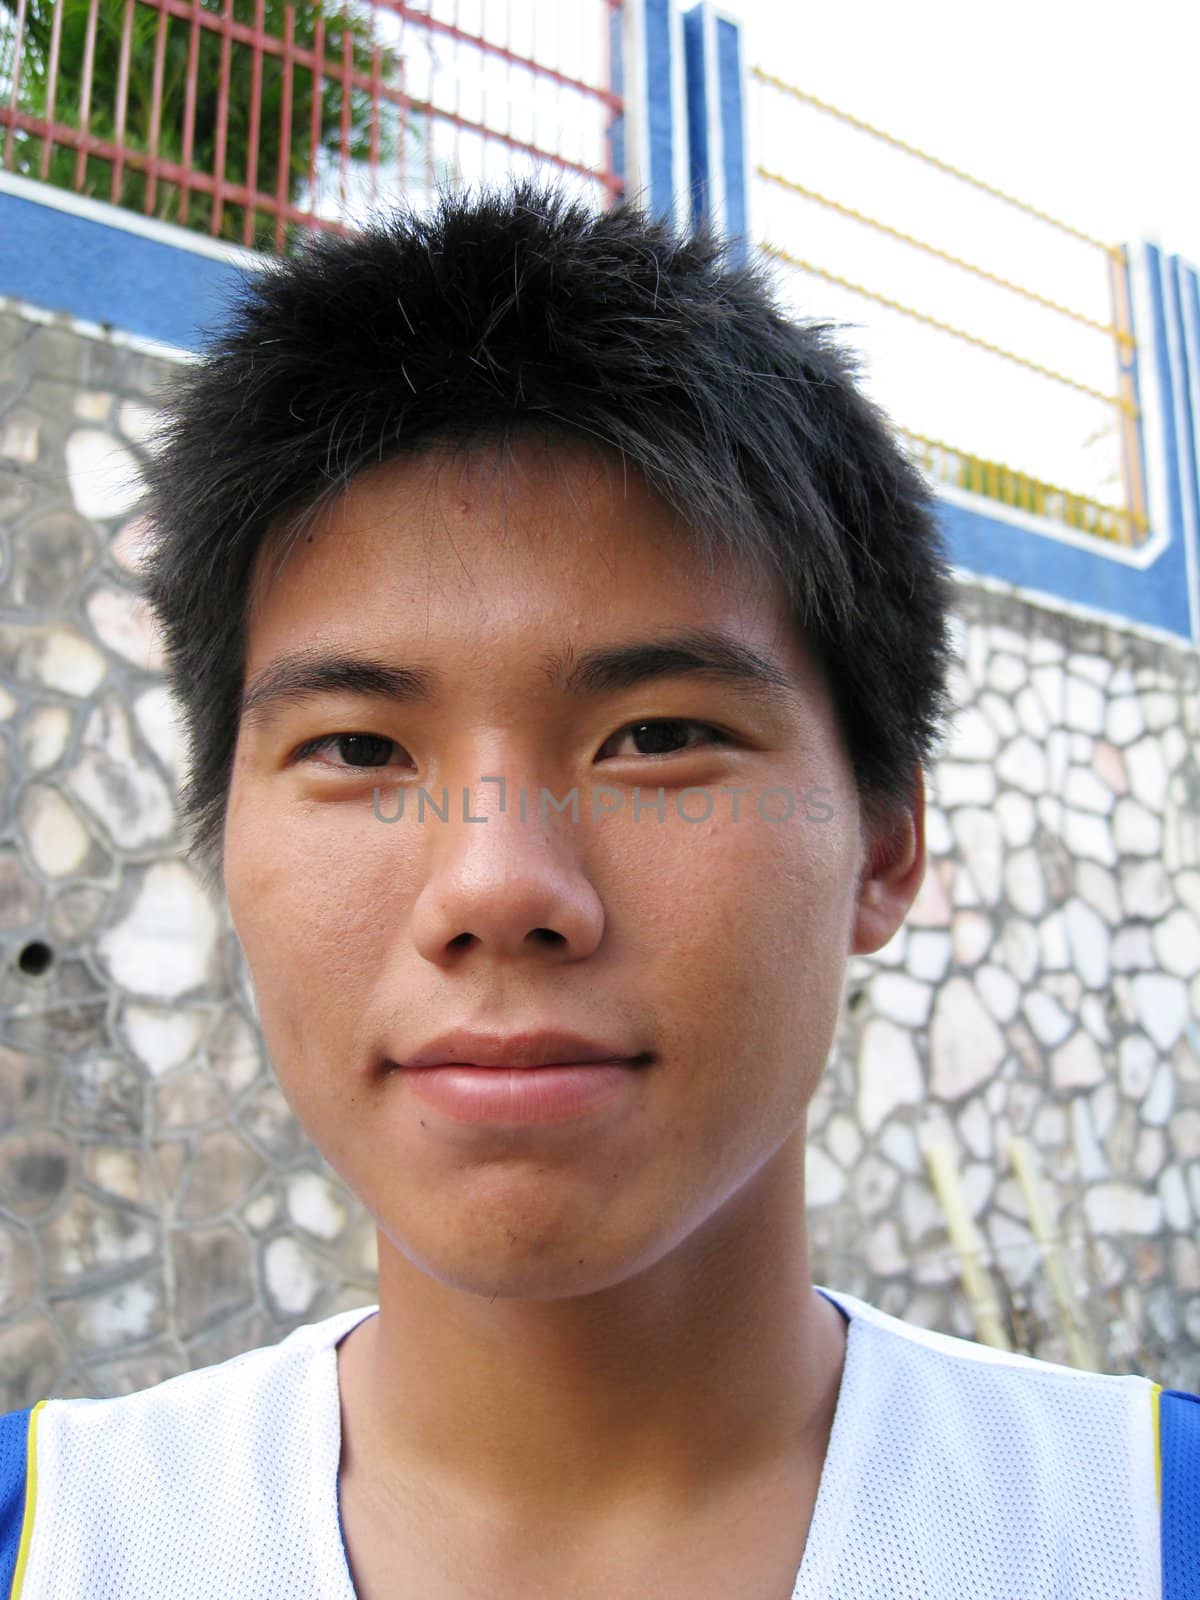 a portraits of a smiling Asian boy